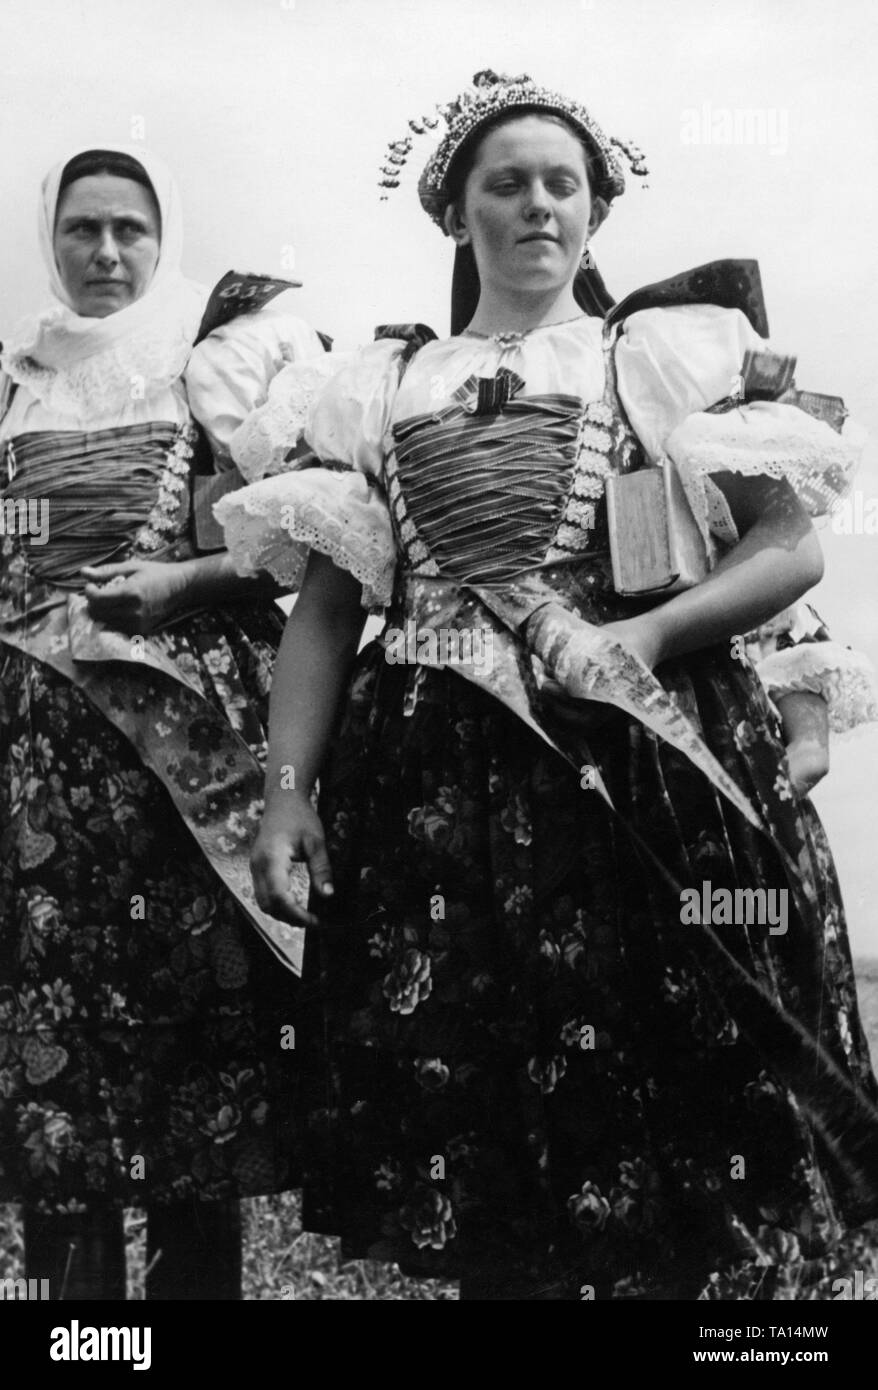 Women wearing the traditional costume of the Slovak region of Spis. In March 1939, the Slovak State became independent on the command of Adolf Hitler. The scene is from the Tobis documentary 'Zips'. Stock Photo